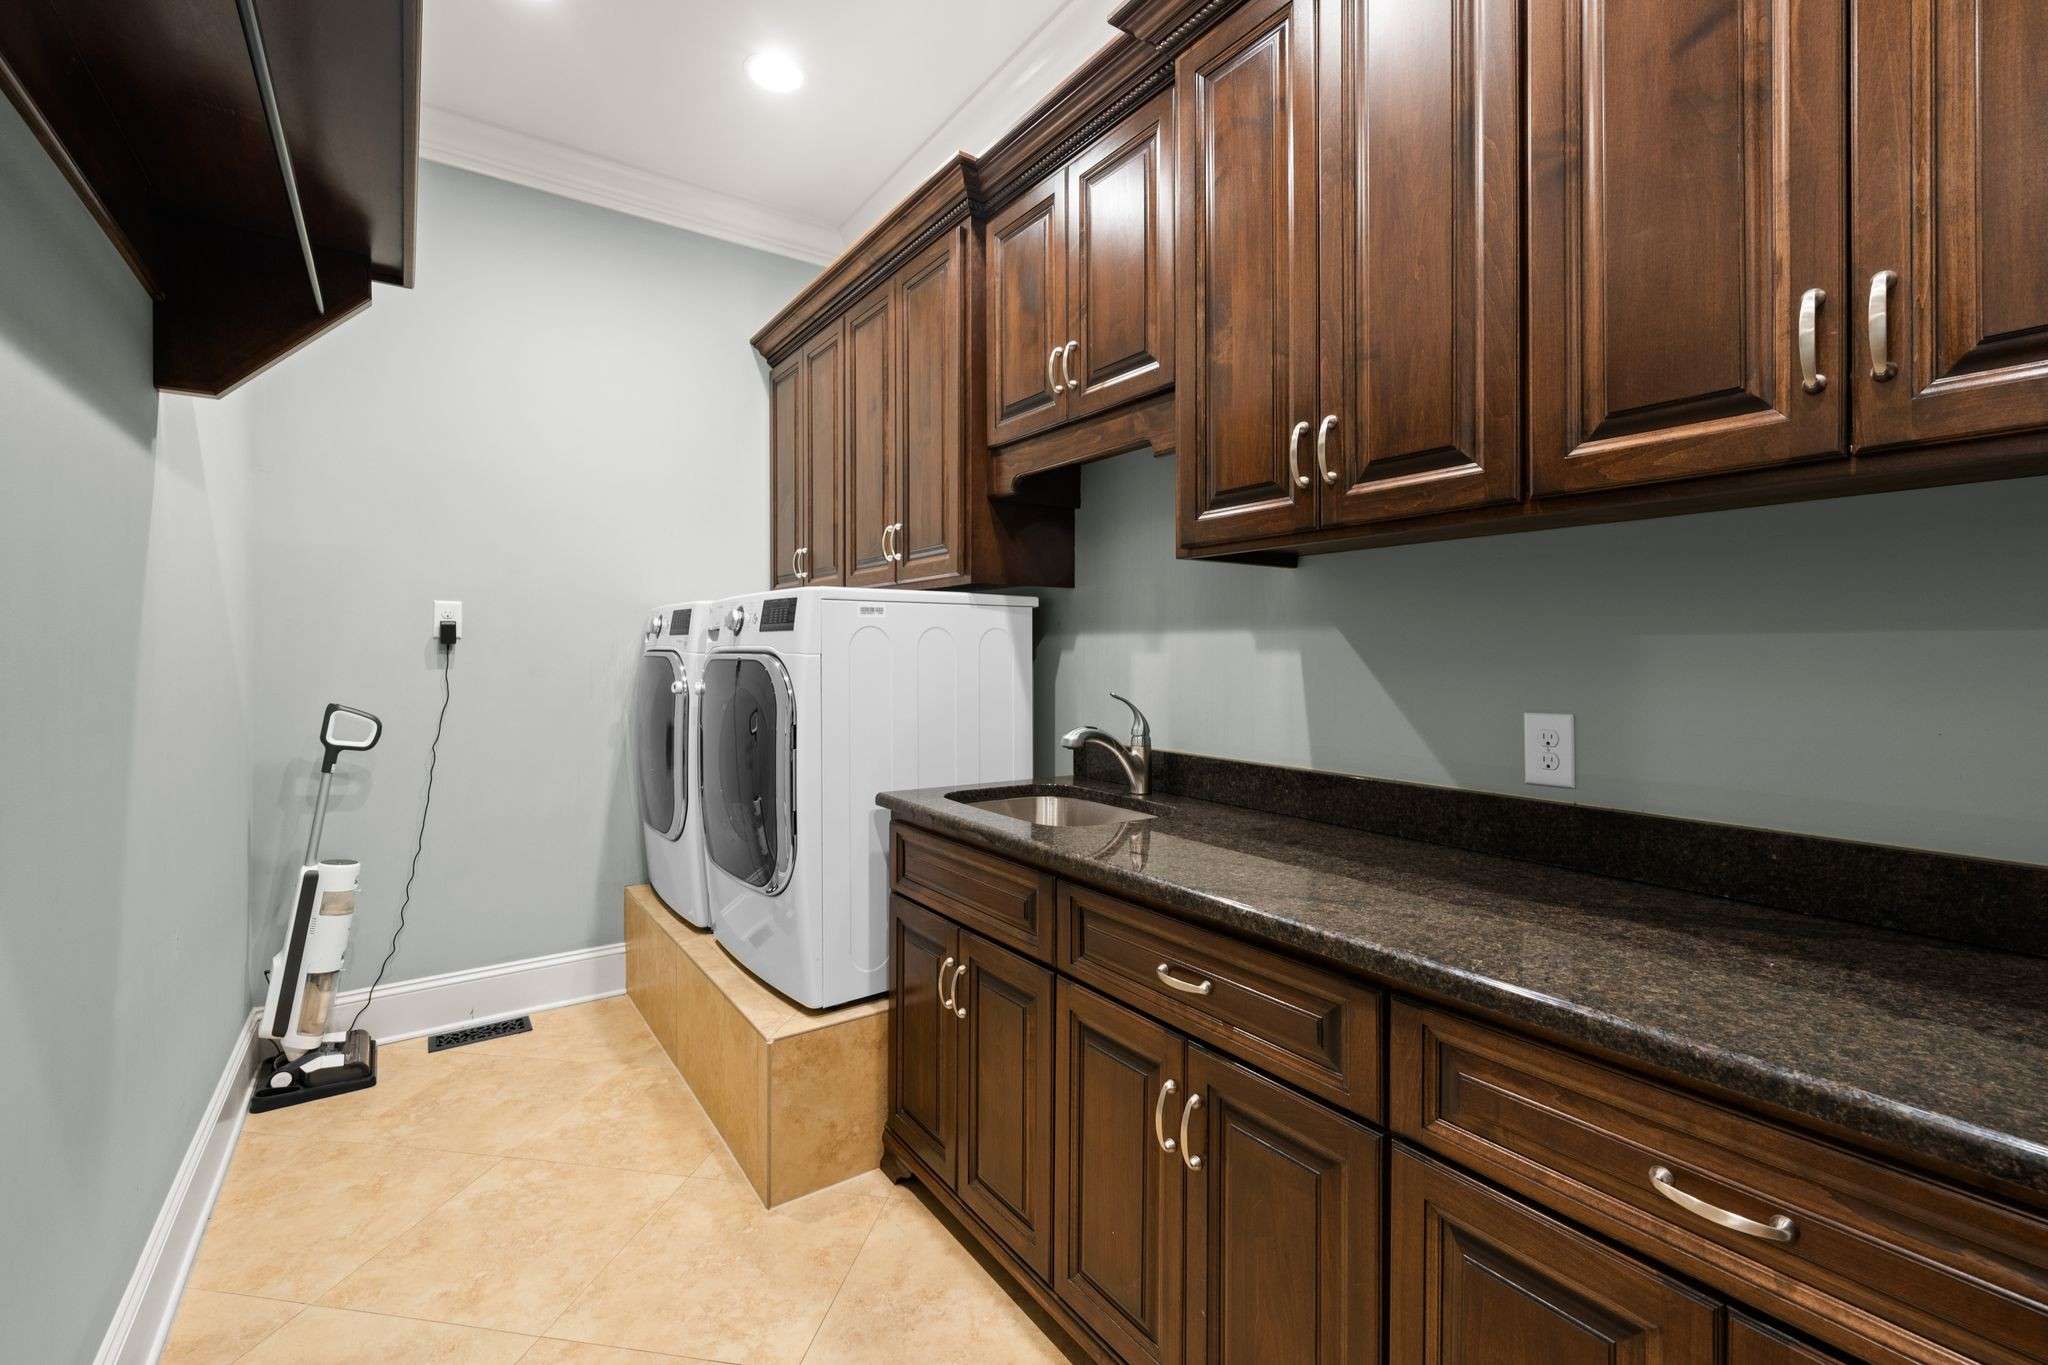 40 of 79. Interior Photo - 846 Armstrong Rd - Photo of Laundry Room, tons of custom cabinets, which also includes sink.